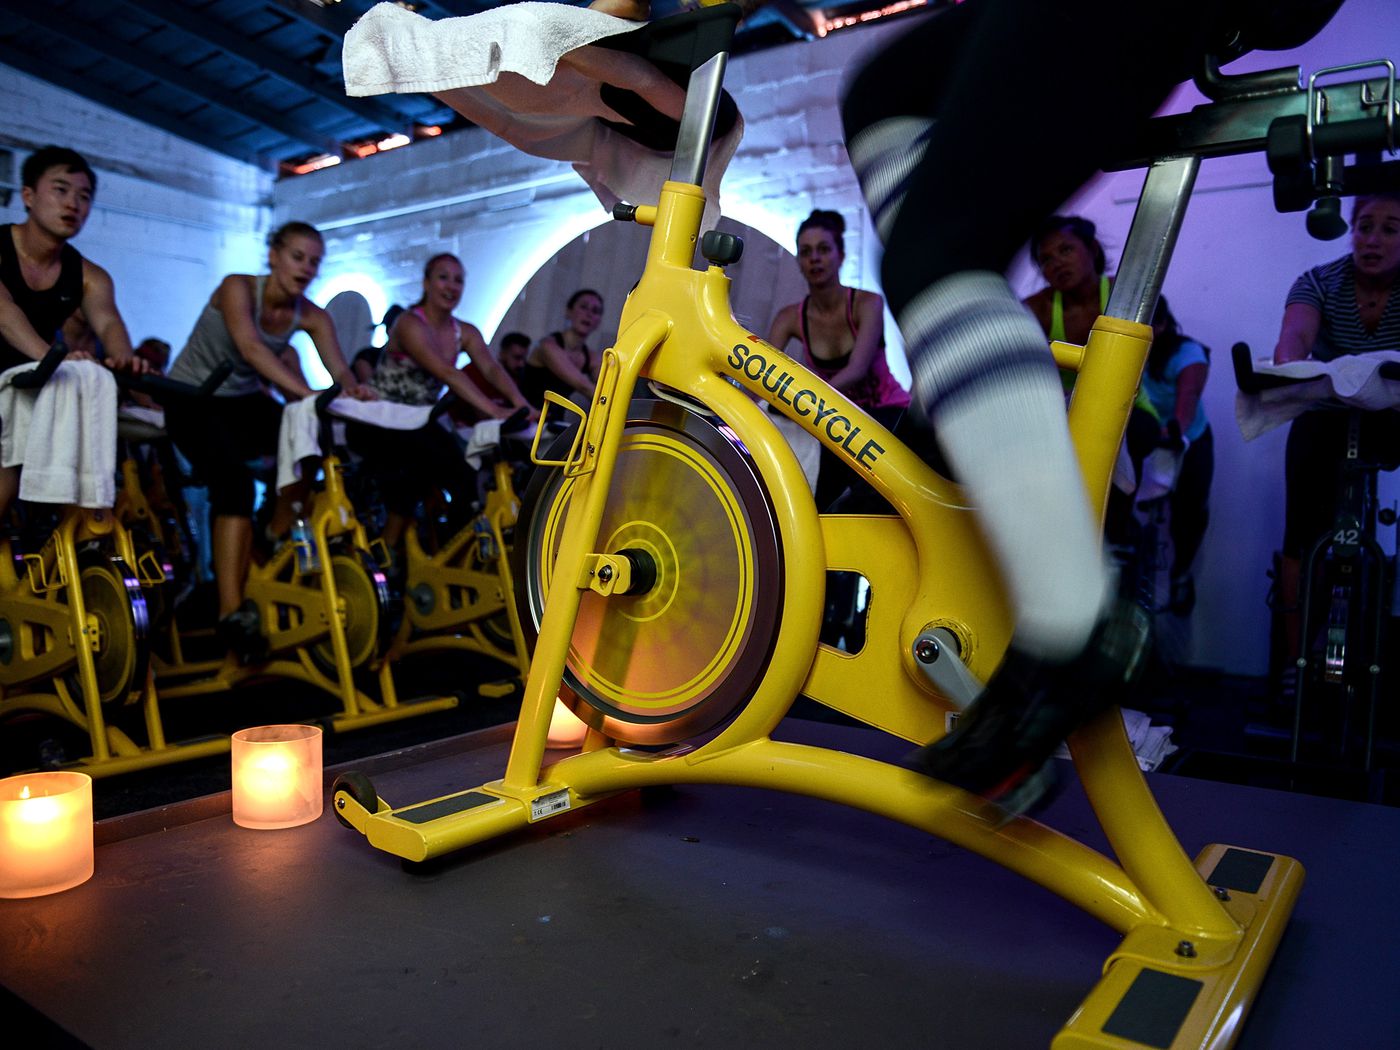 Questions About Soulcycle You Were Too Embarrassed To Ask Vox